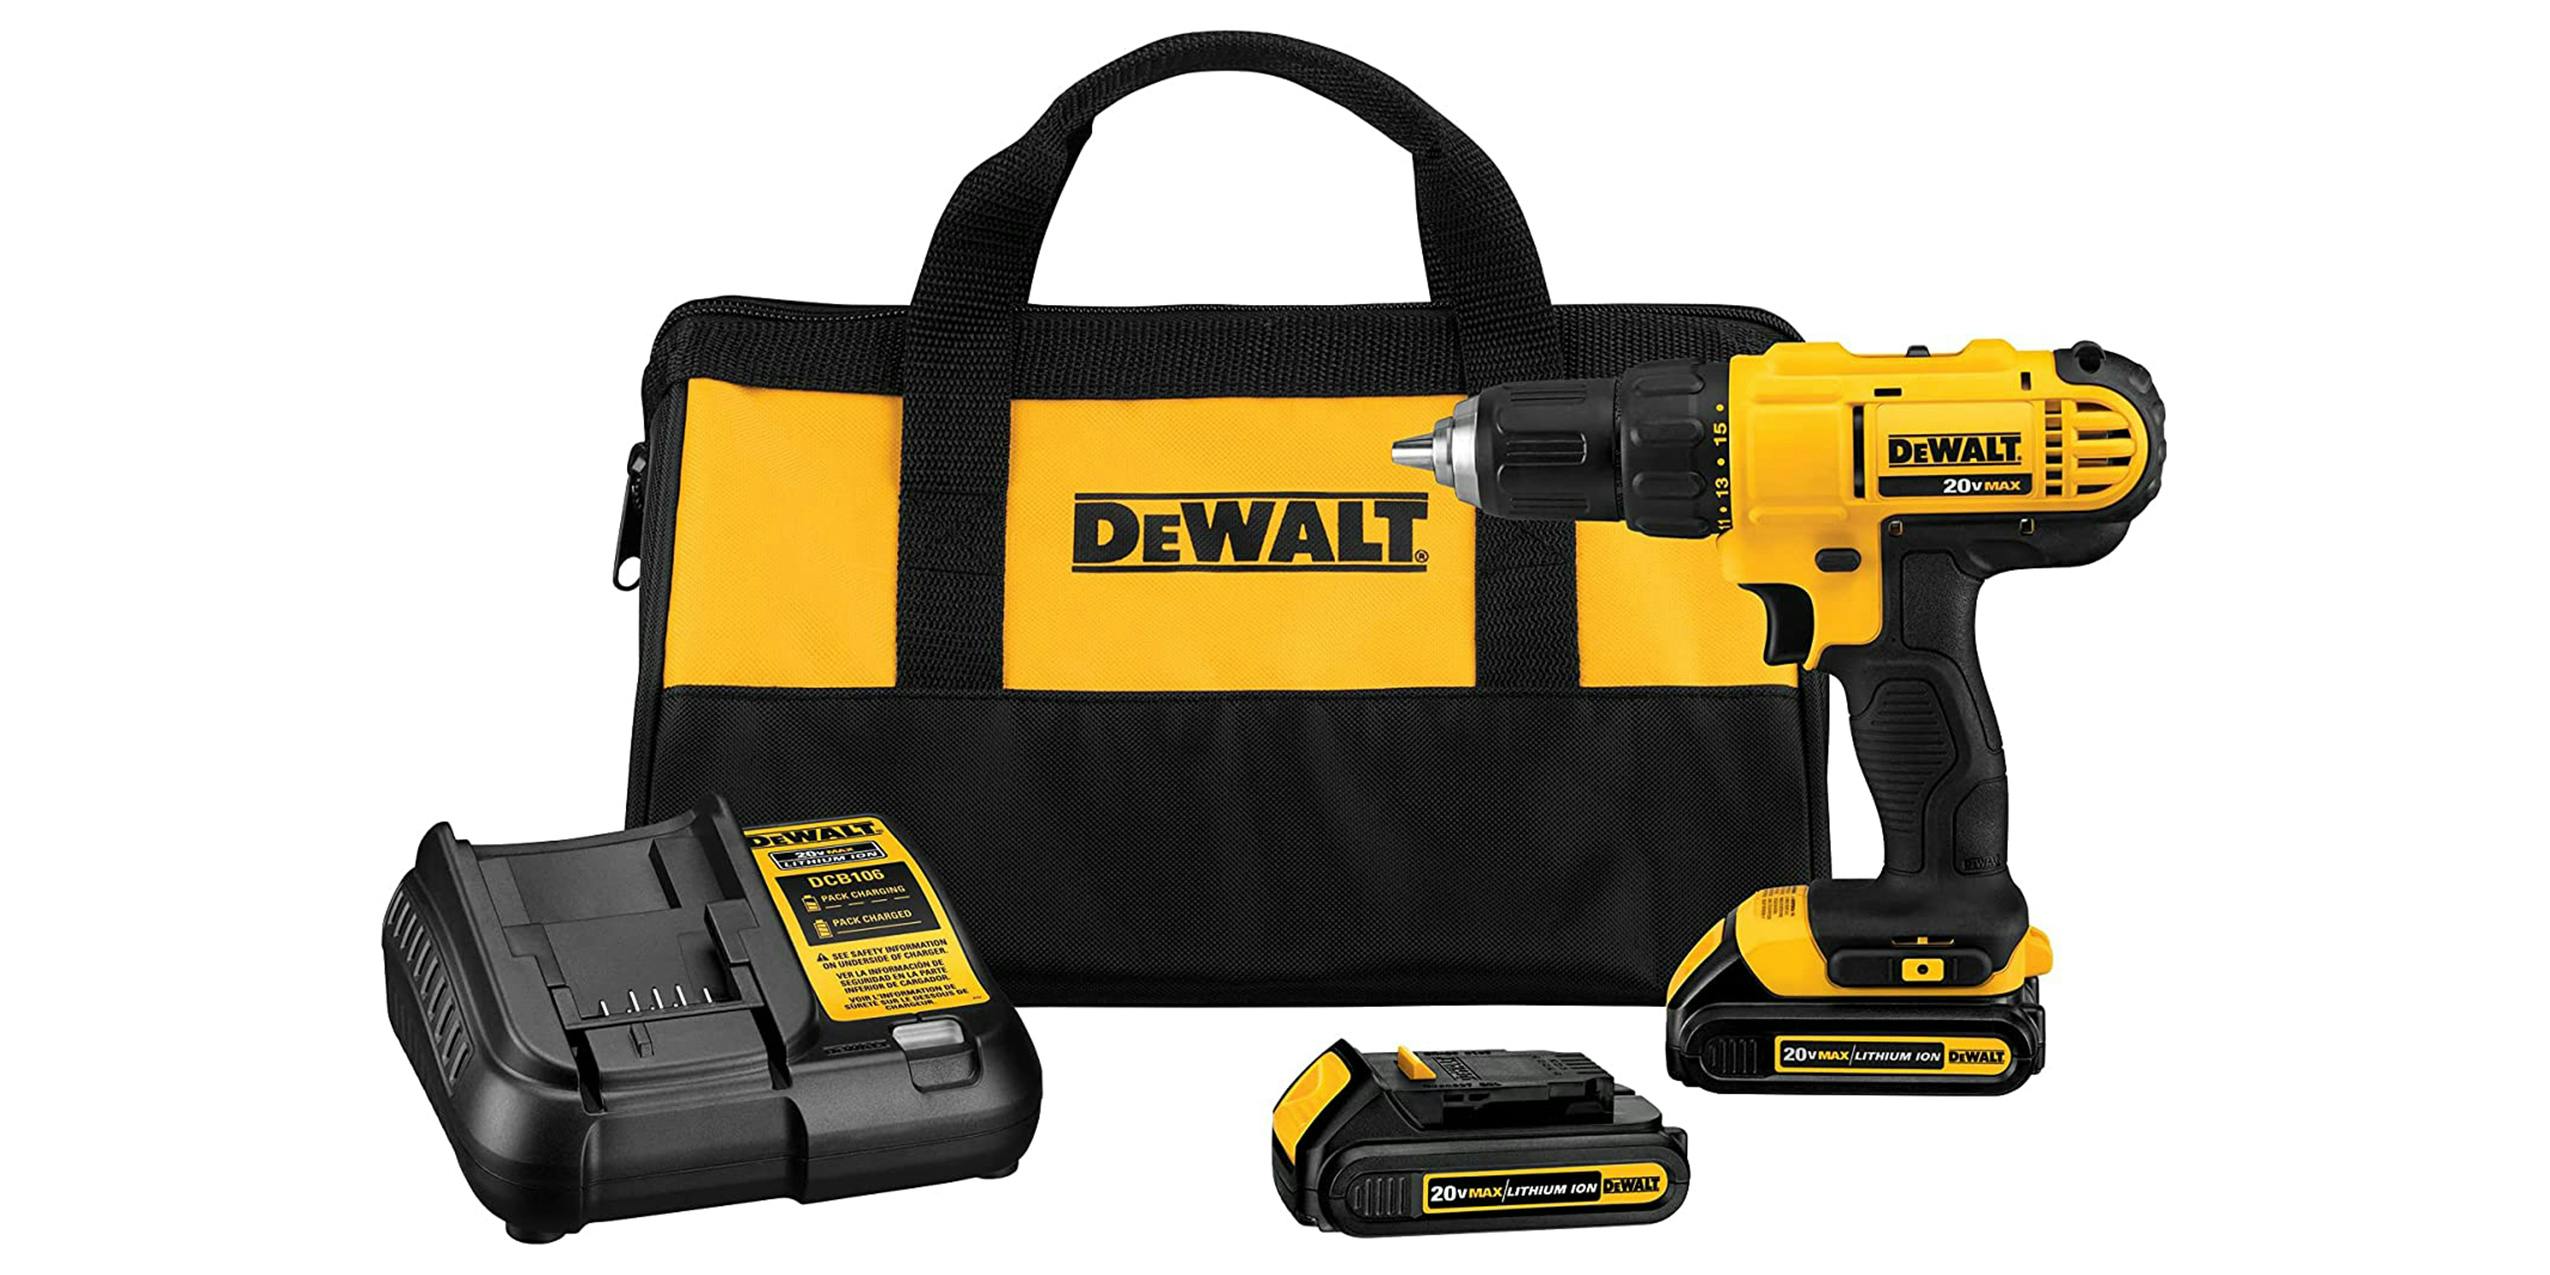 The Dewalt Drill and Driver kit along with its carrying case.